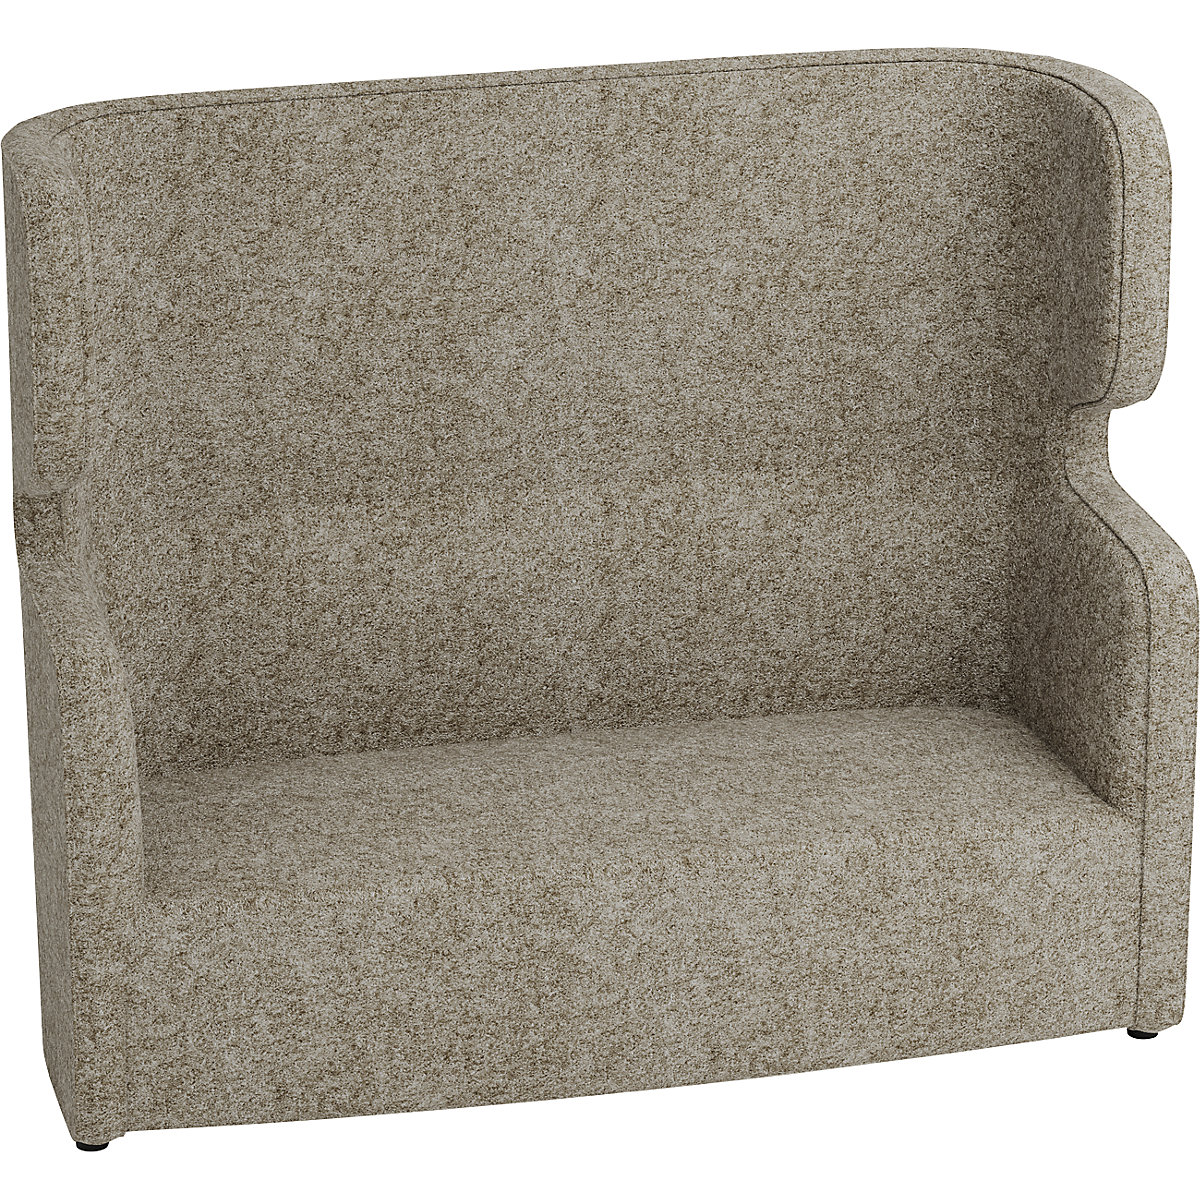 VIVO acoustic sofa – BISLEY, two-seater with high back rest, beige